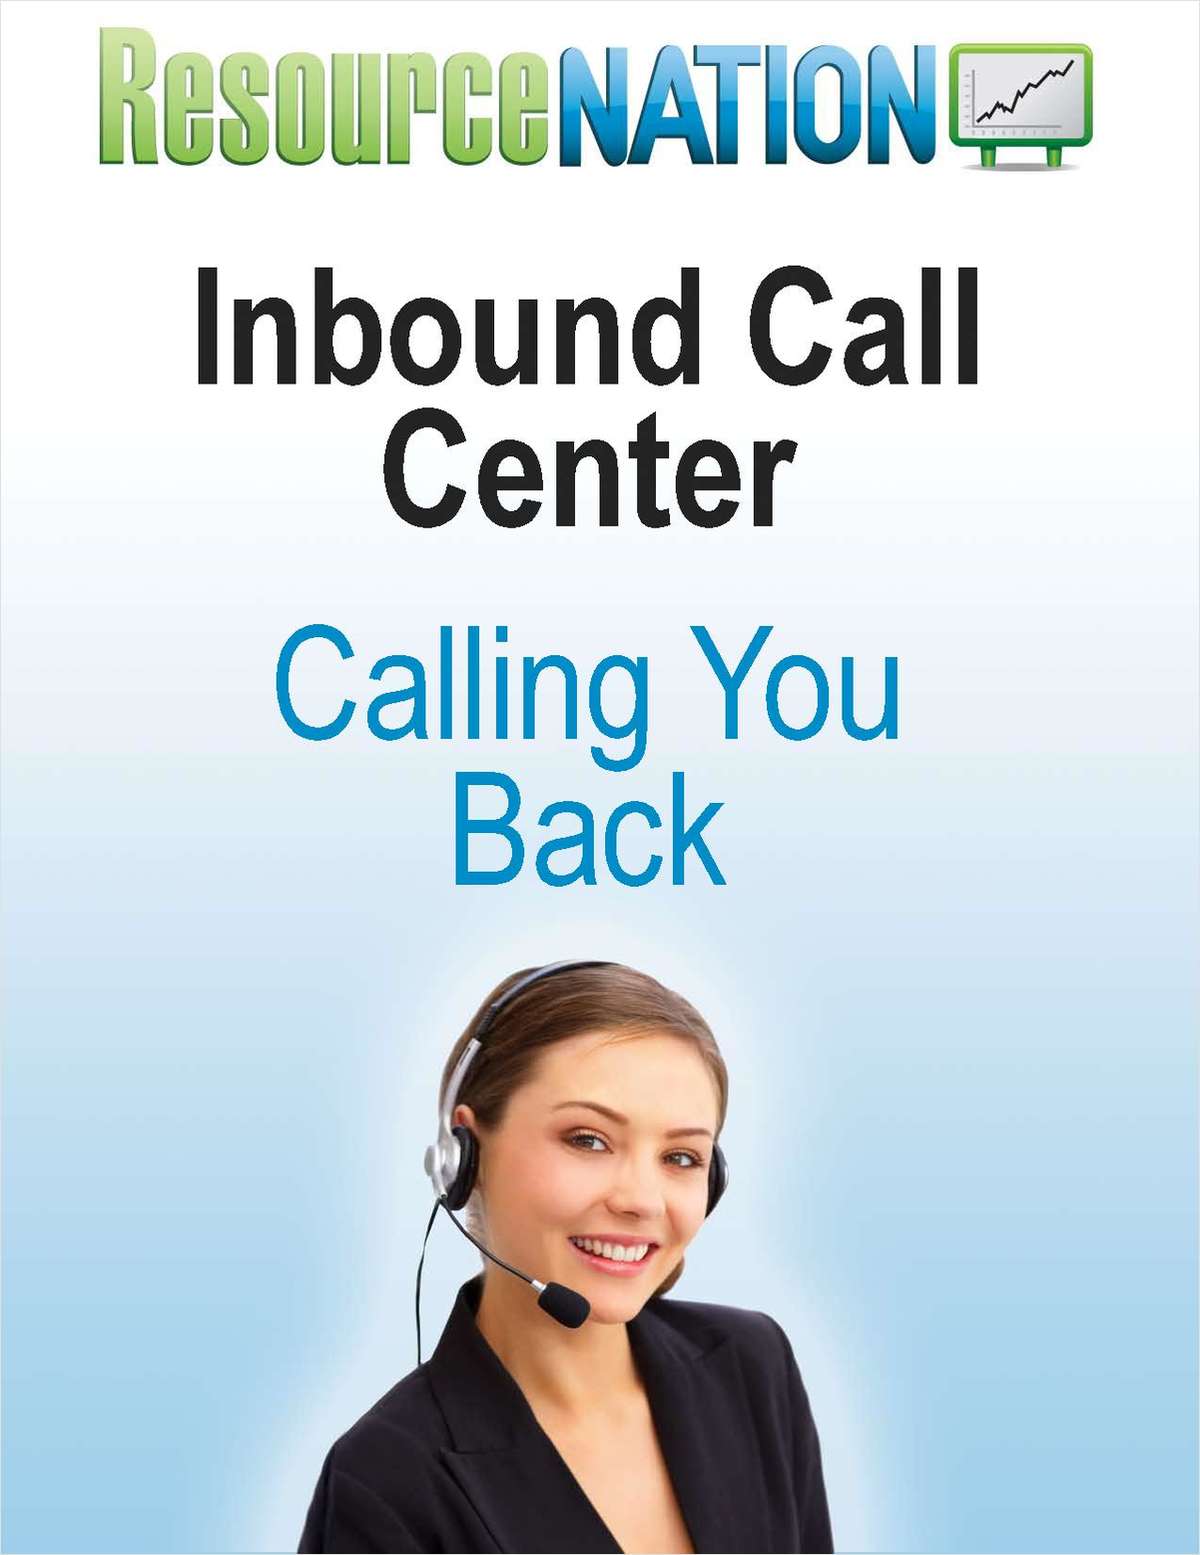 Call Centers Are The Right Call For Any Size Business